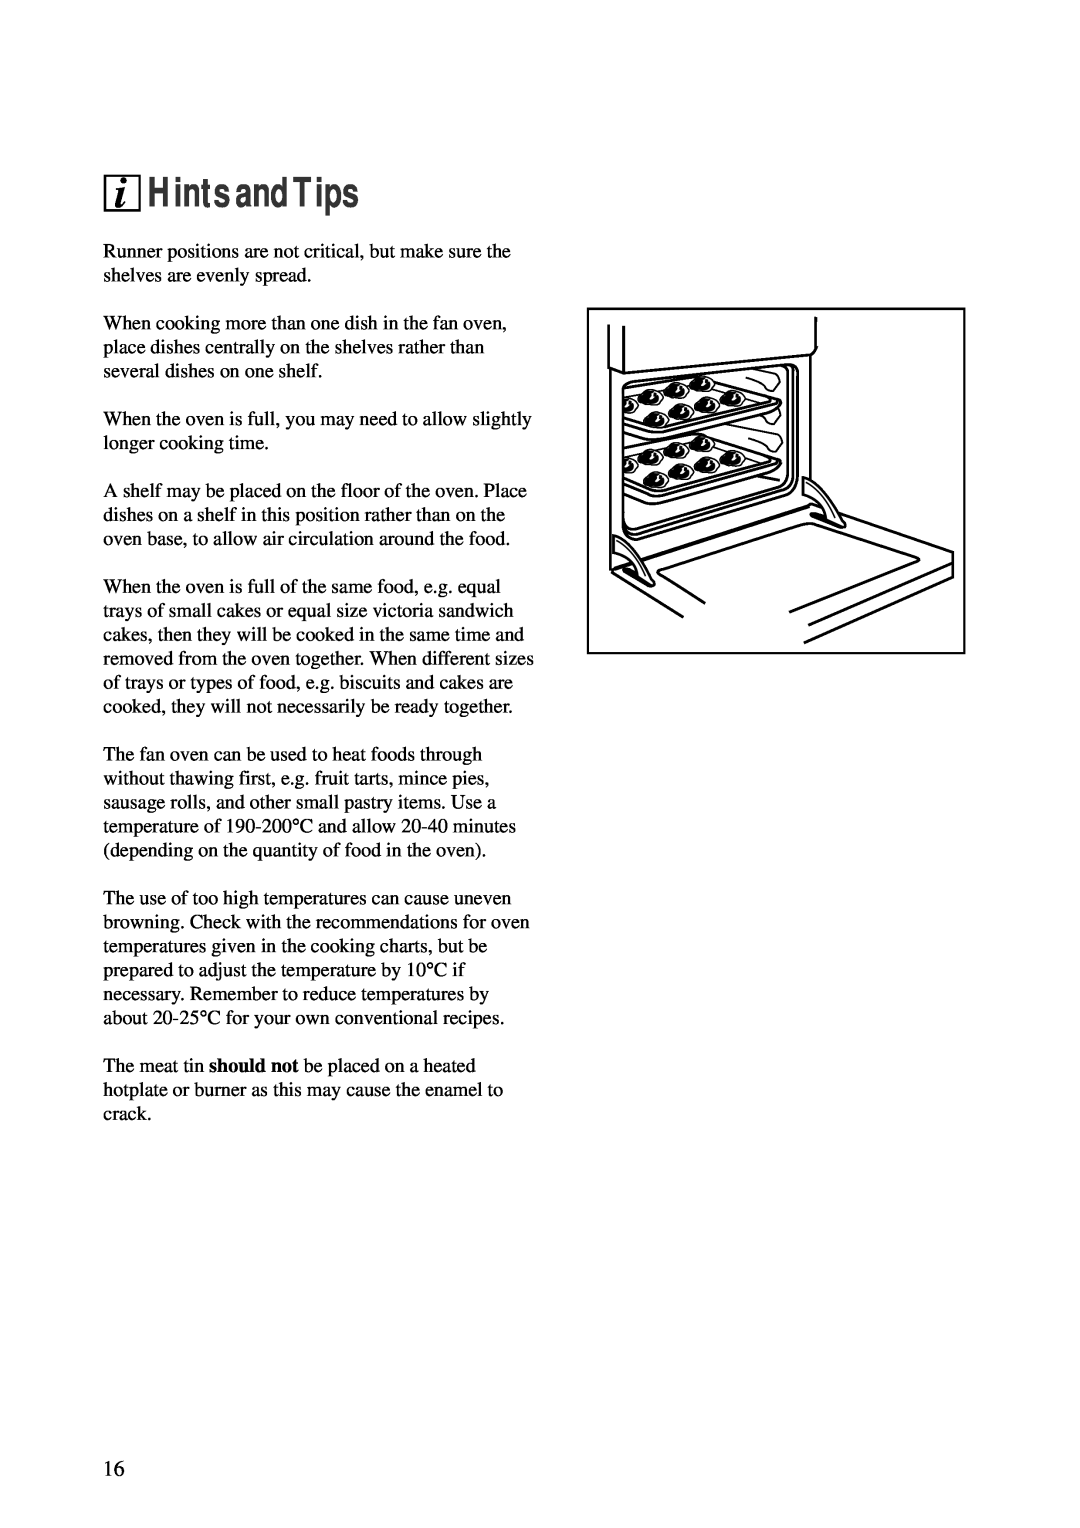 Zanussi ZBM 890 manual Hints andTips, Runner positions are not critical, but make sure the shelves are evenly spread 